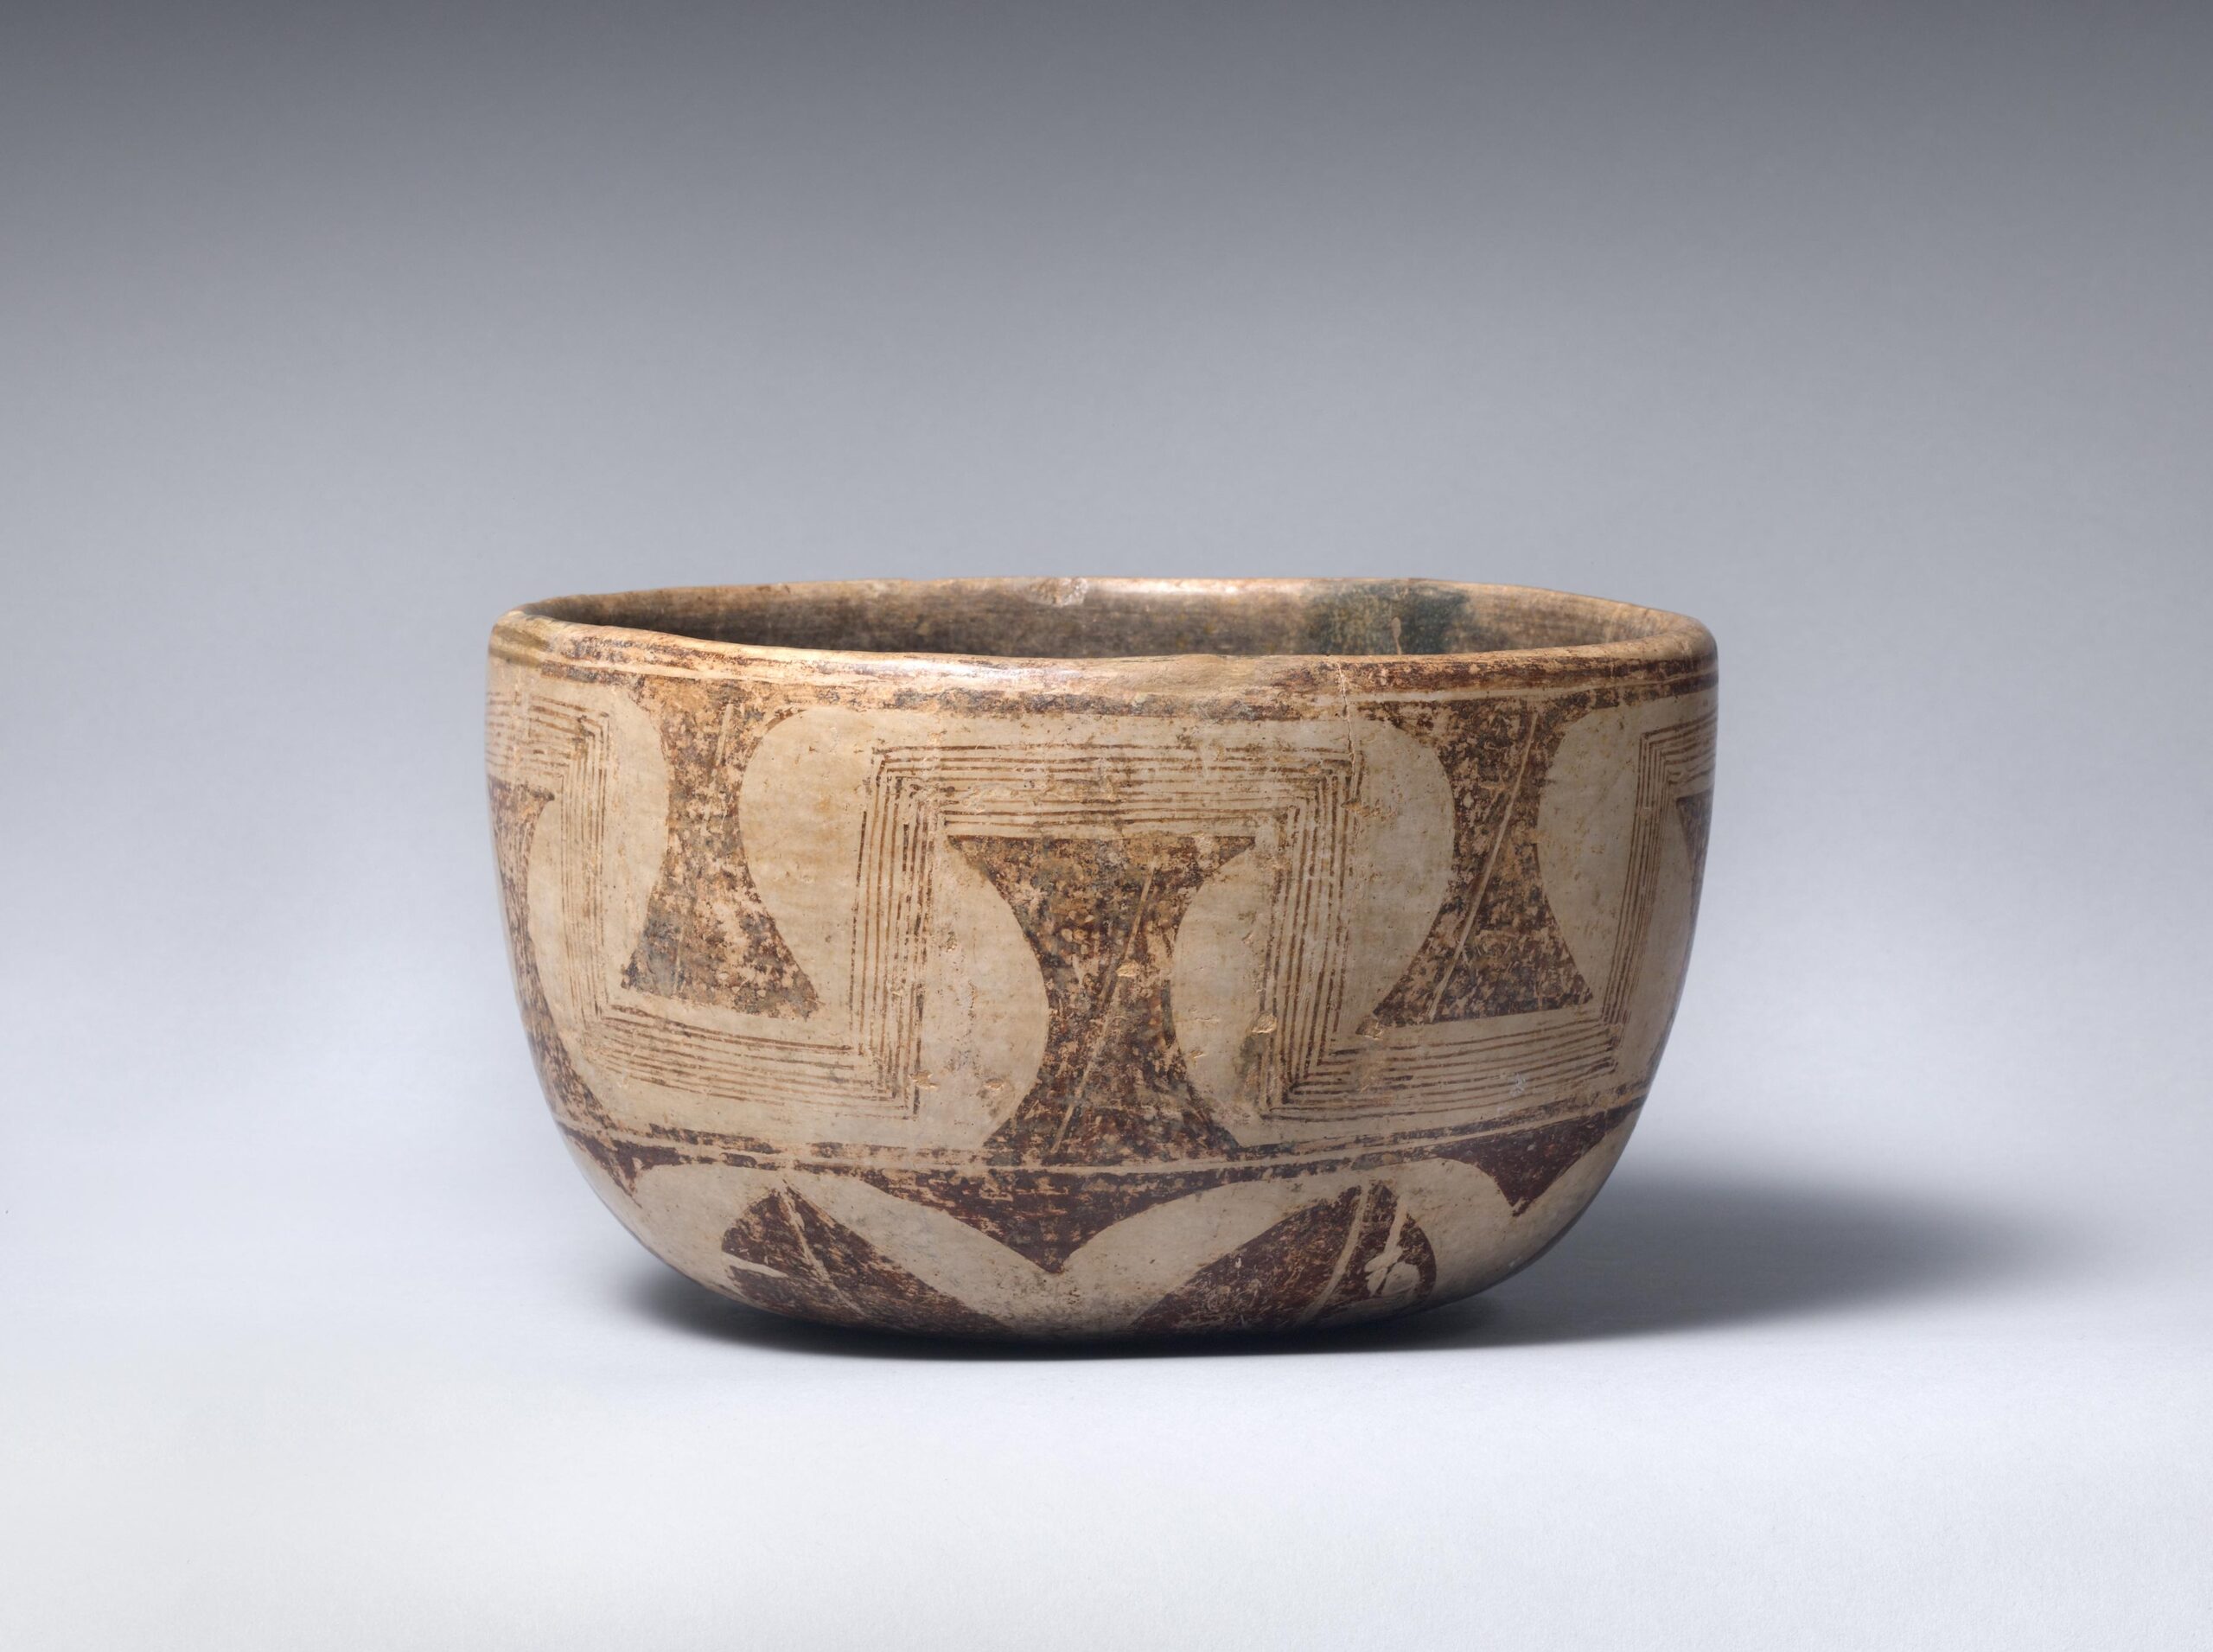 Ceramic bowl painted with striped, floral, and wedge motifs.